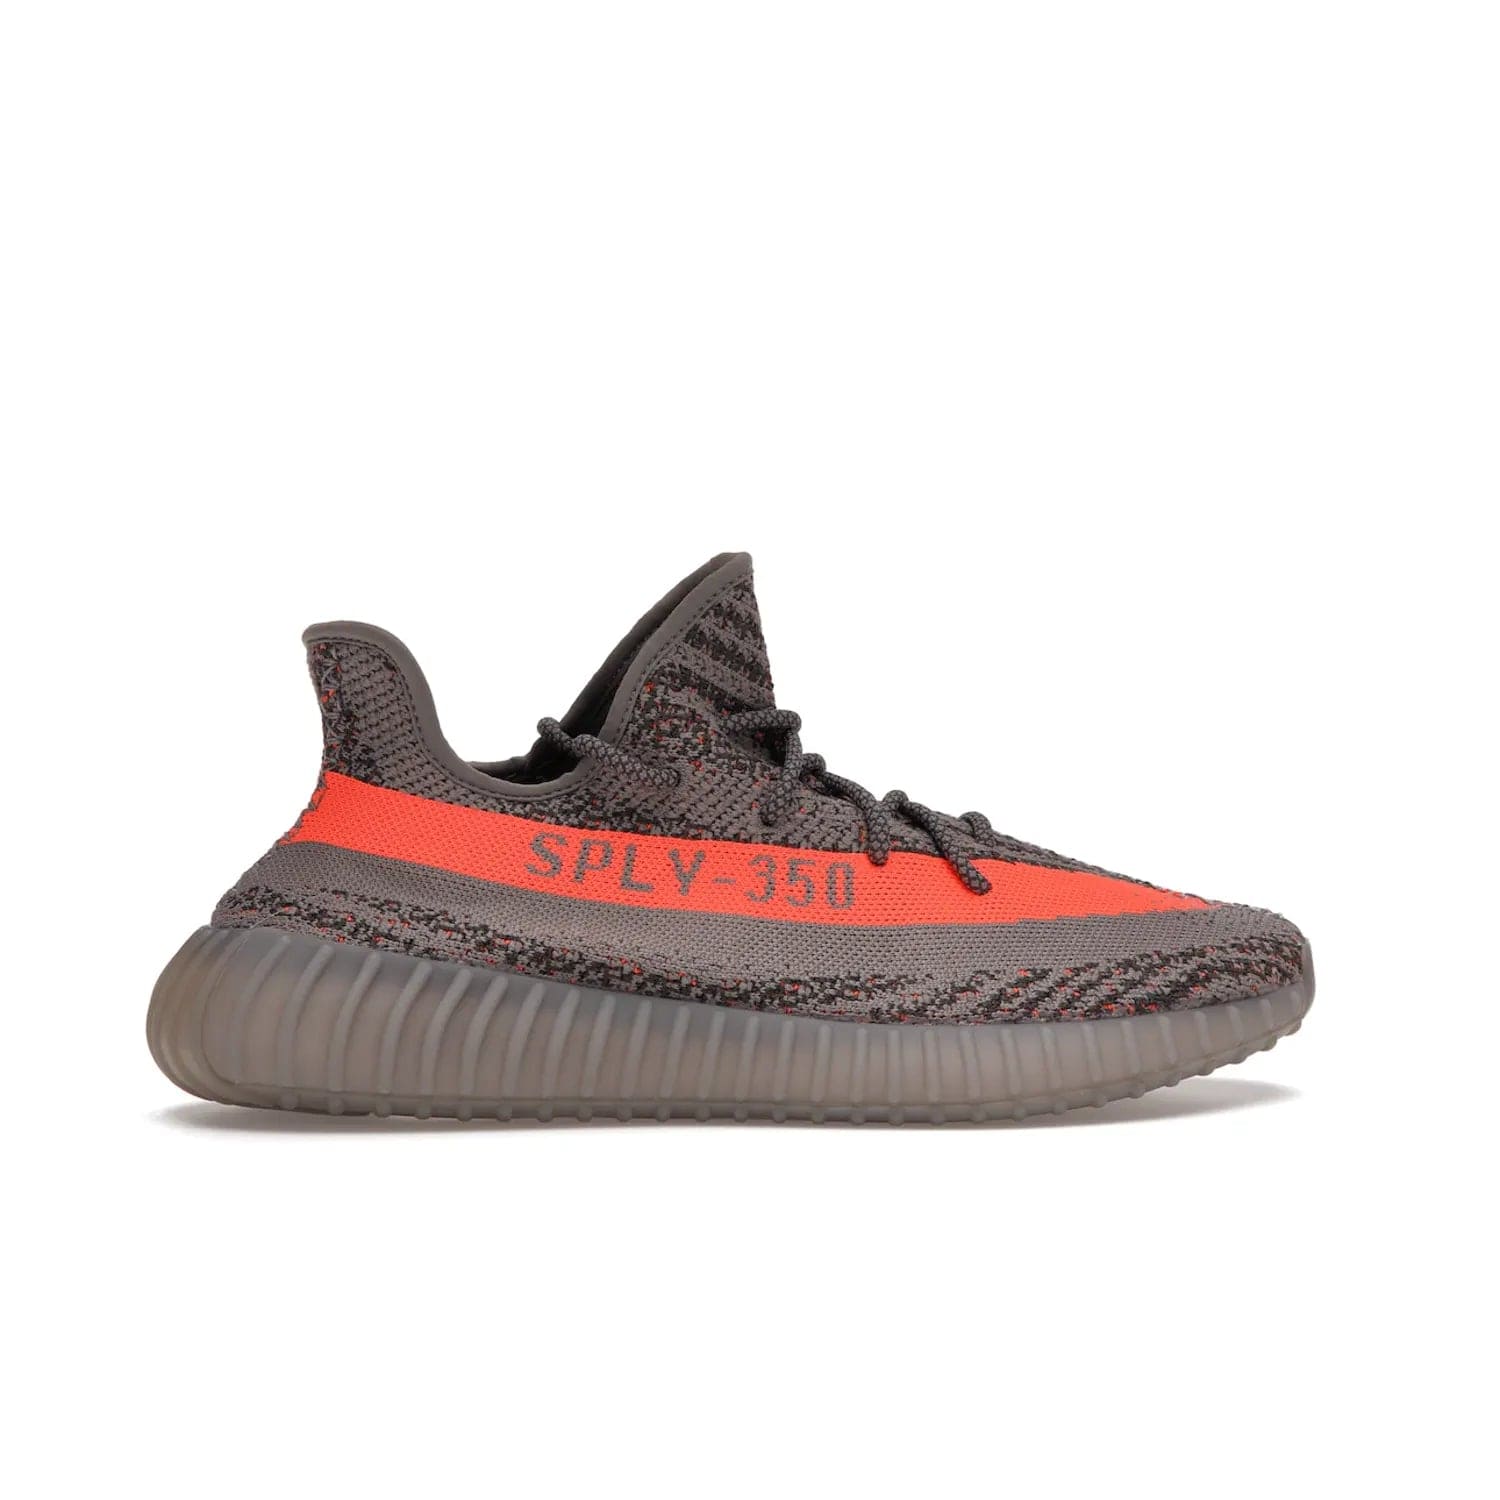 adidas Yeezy Boost 350 V2 Beluga Reflective - Image 36 - Only at www.BallersClubKickz.com - Shop the adidas Yeezy Boost 350 V2 Beluga Reflective: a stylish, reflective sneaker that stands out. Featuring Boost sole, Primeknit upper & signature orange stripe. Available Dec 2021.